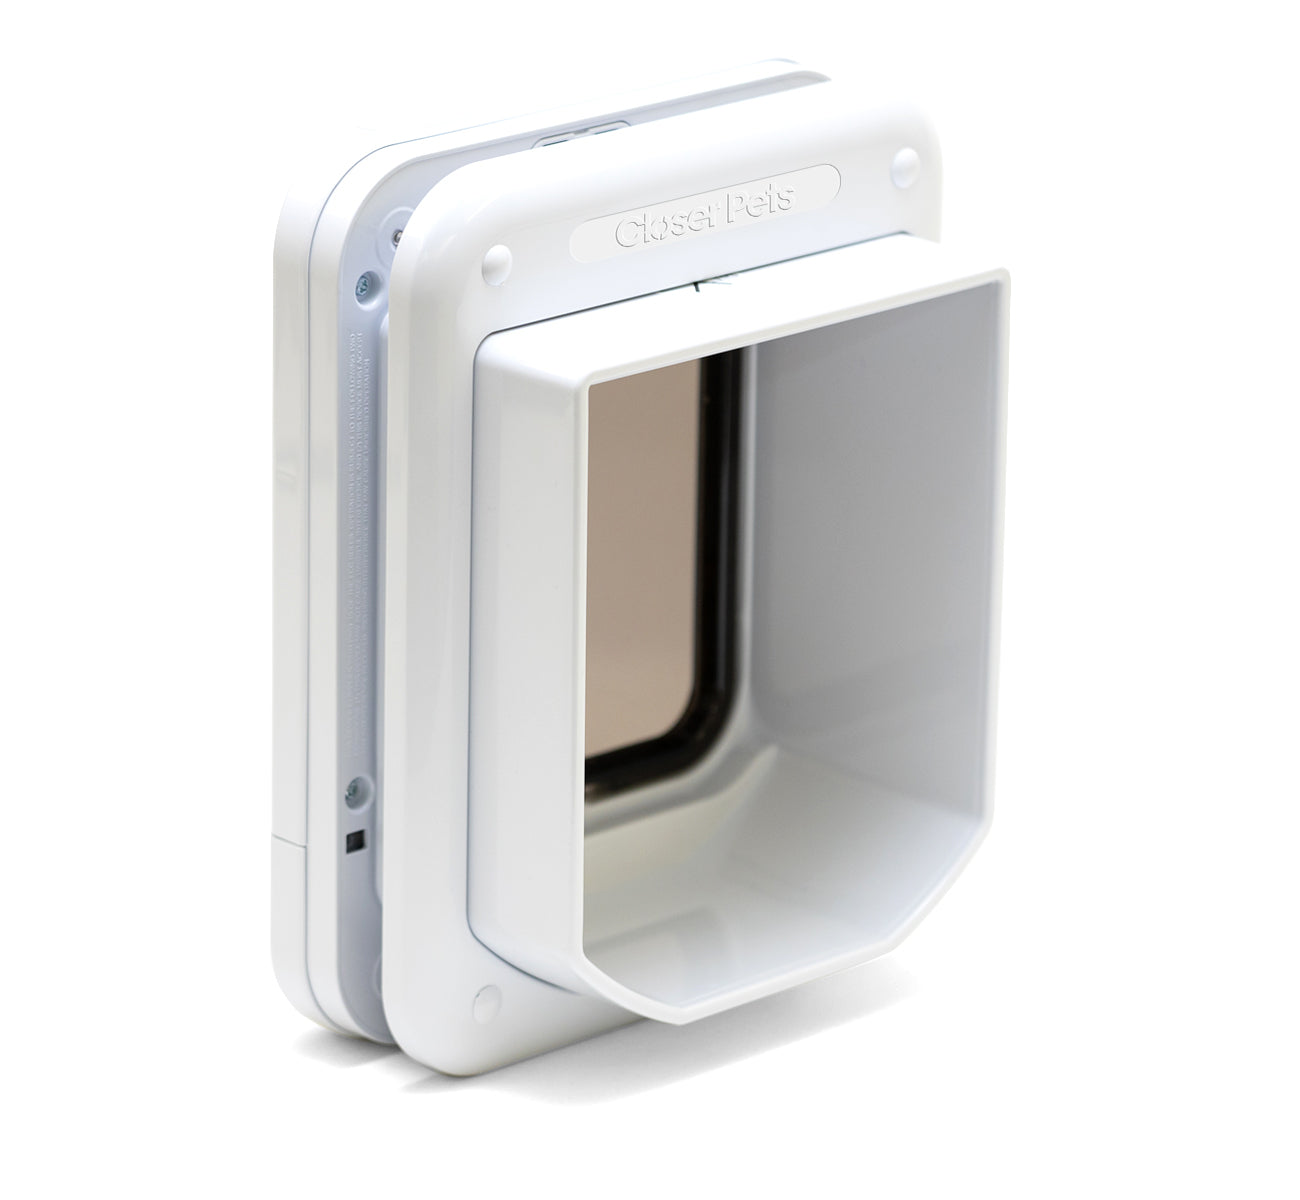 Closer Pets Microchip-activated Weatherproof Flap/Door with Manual Lock – White (CP360W)